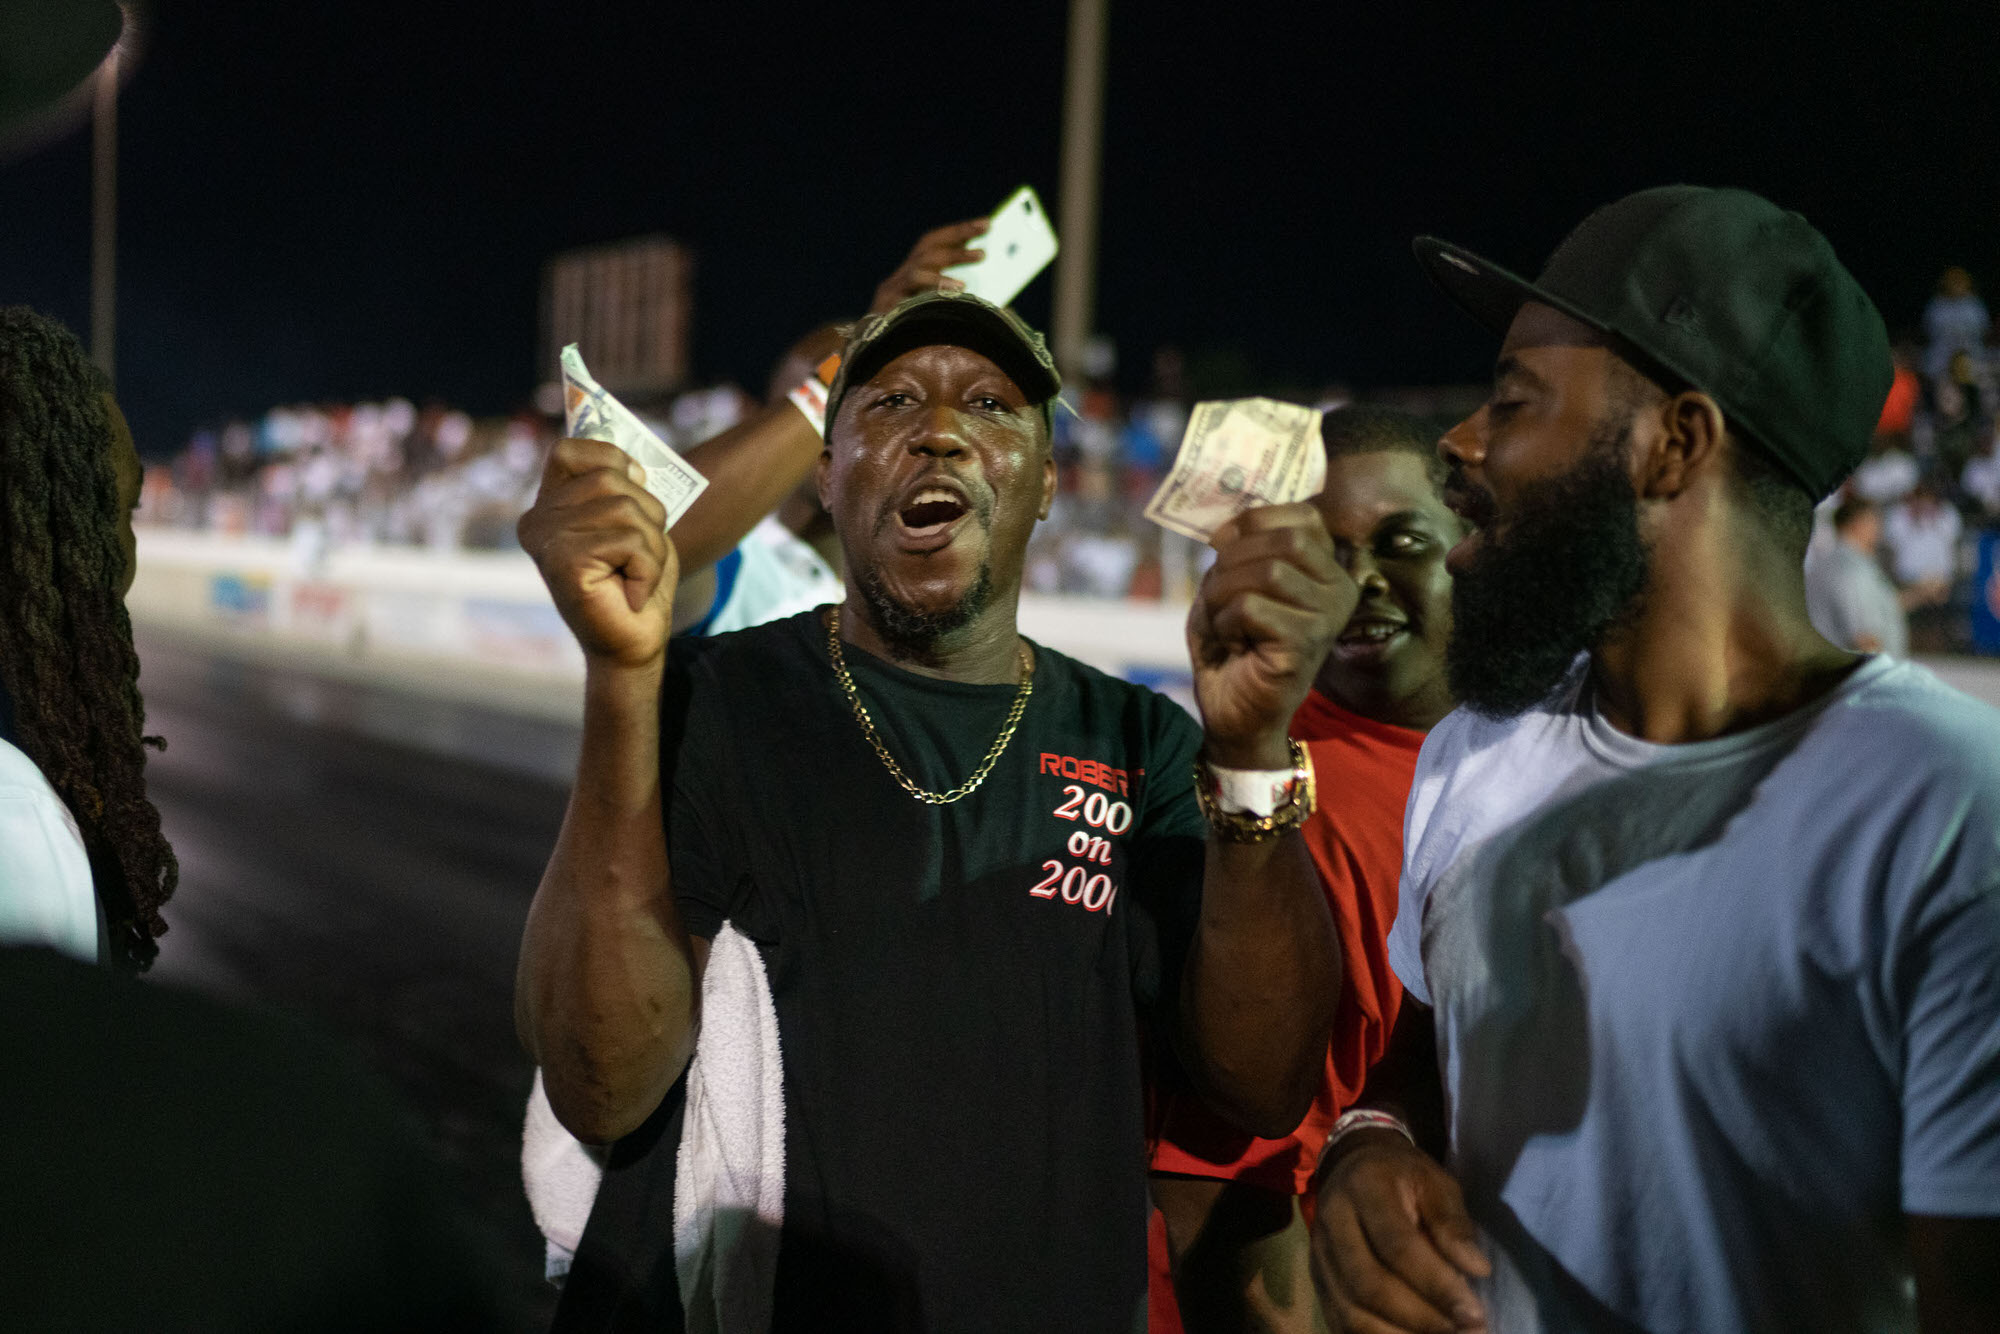 DONK Racing betting money at the dragstrip